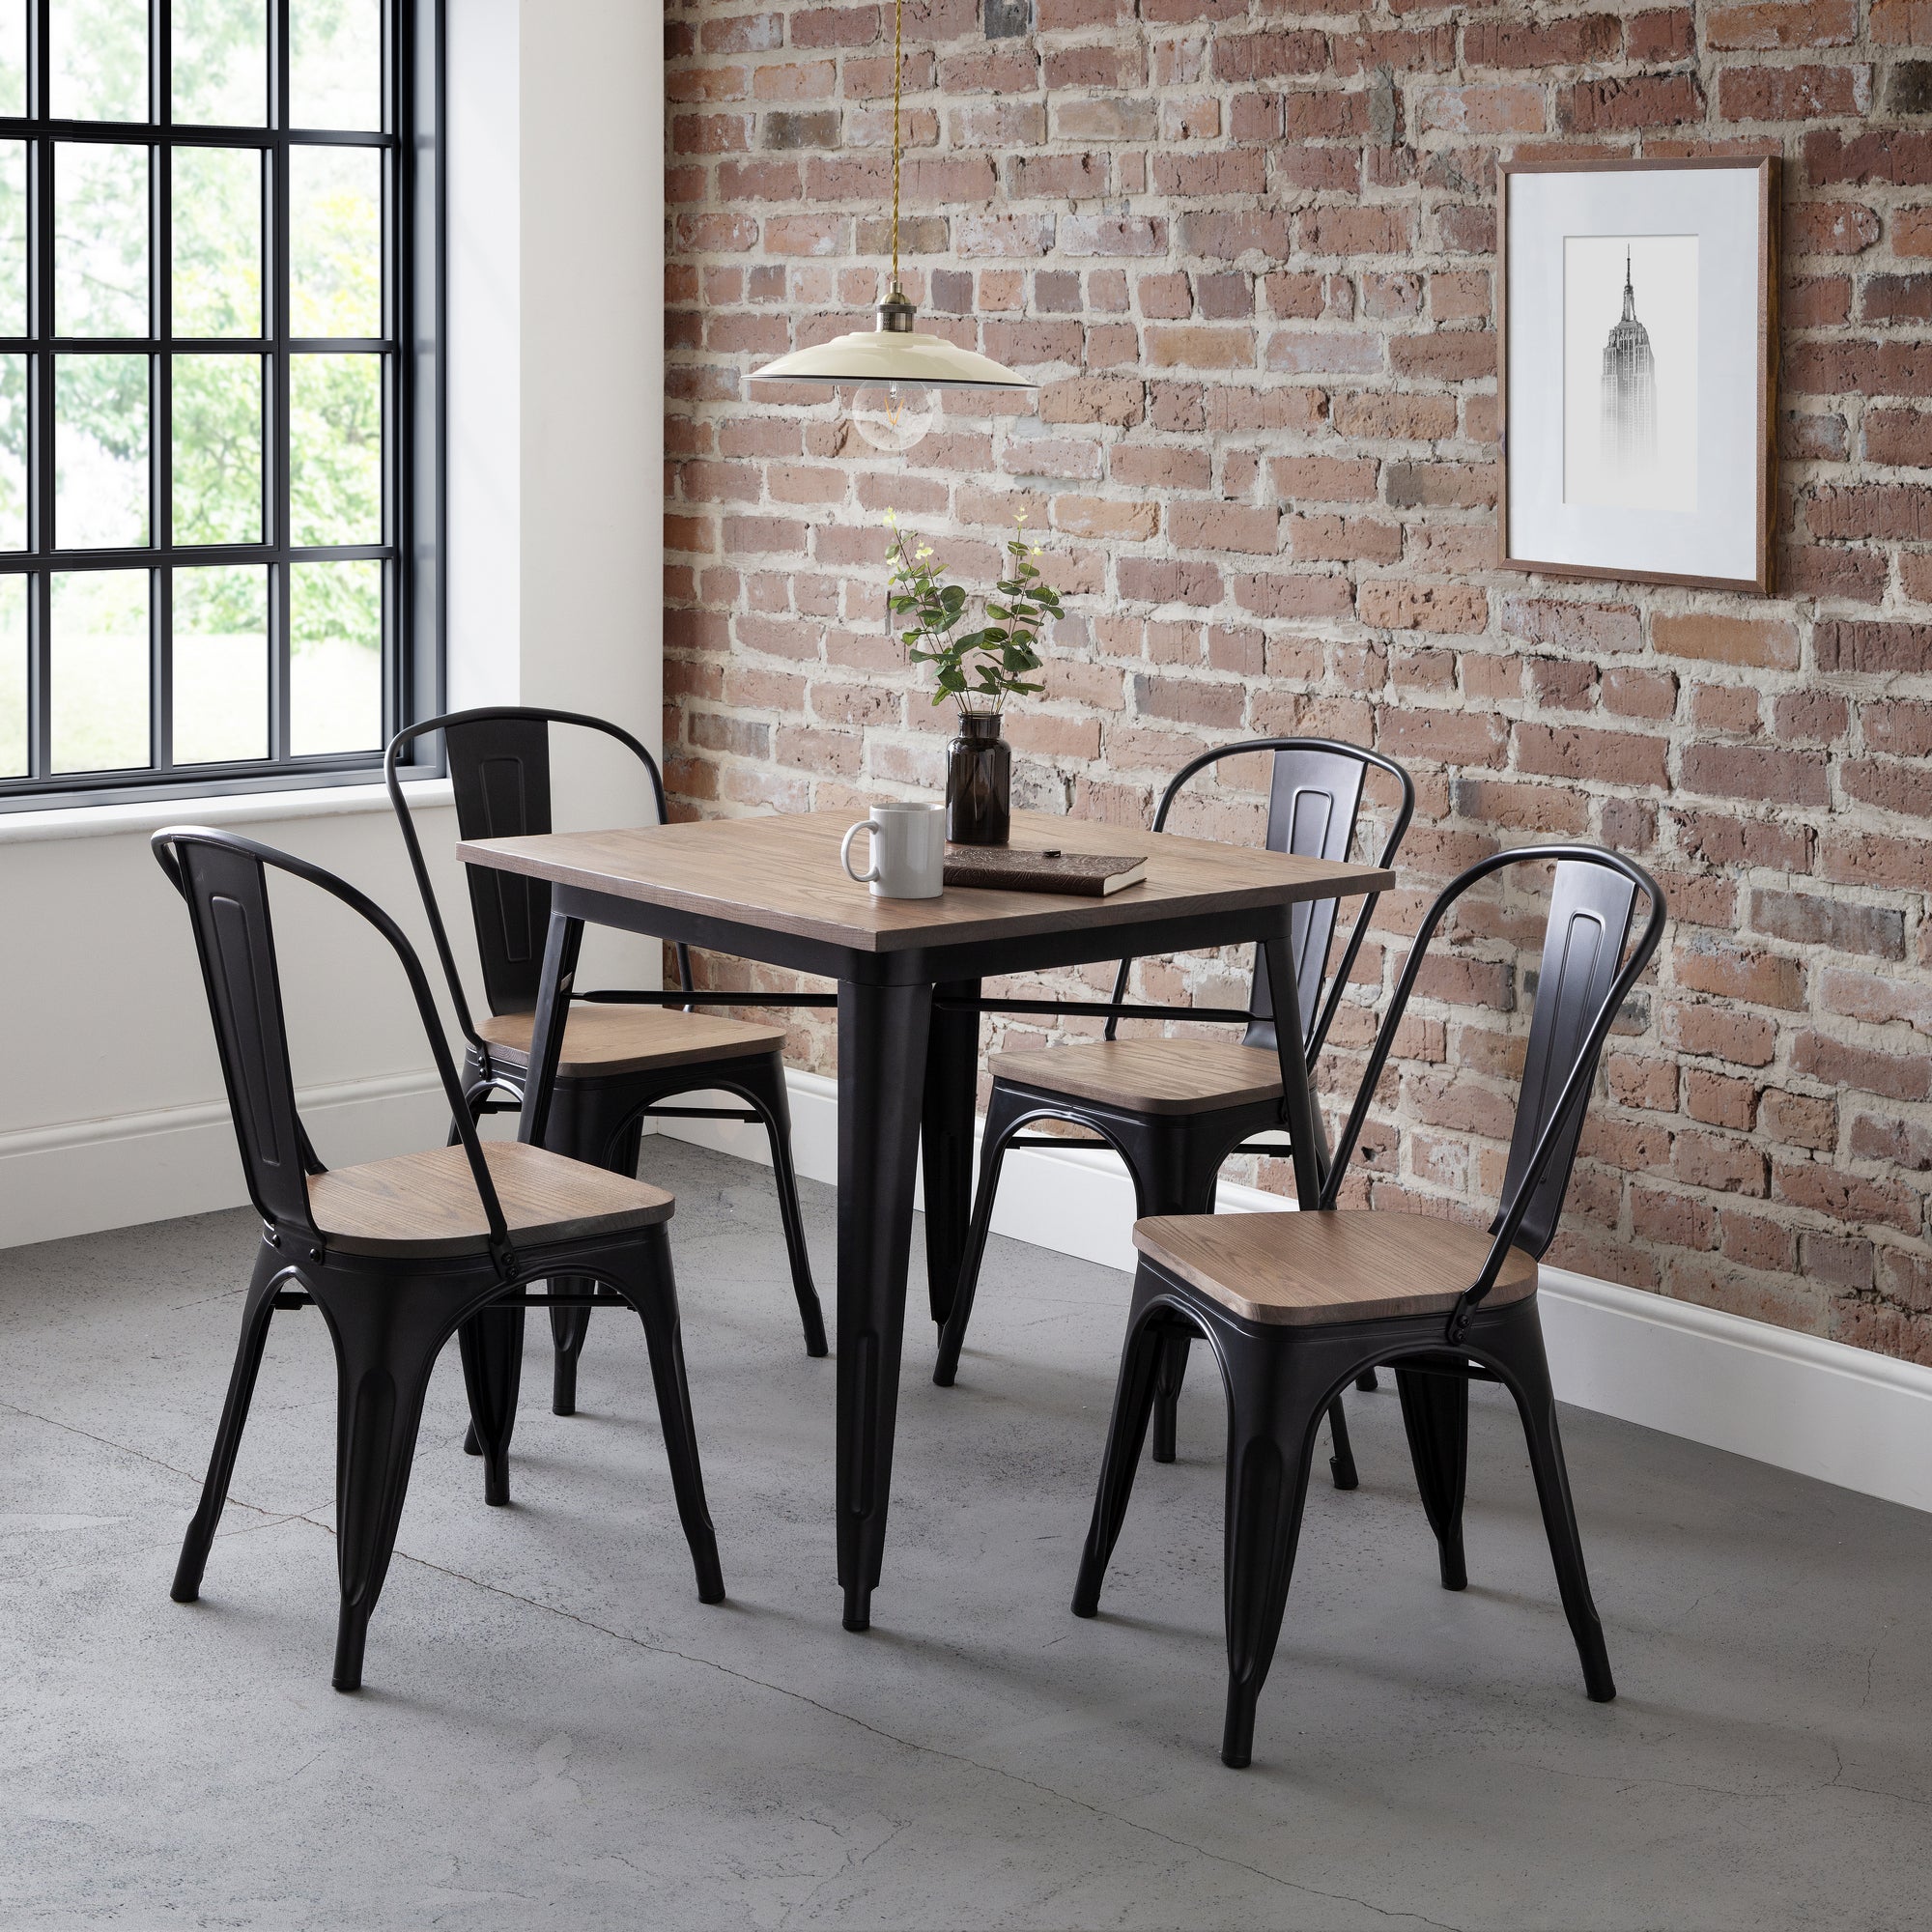 Grafton Square Dining Table With 4 Chairs Brown Brown